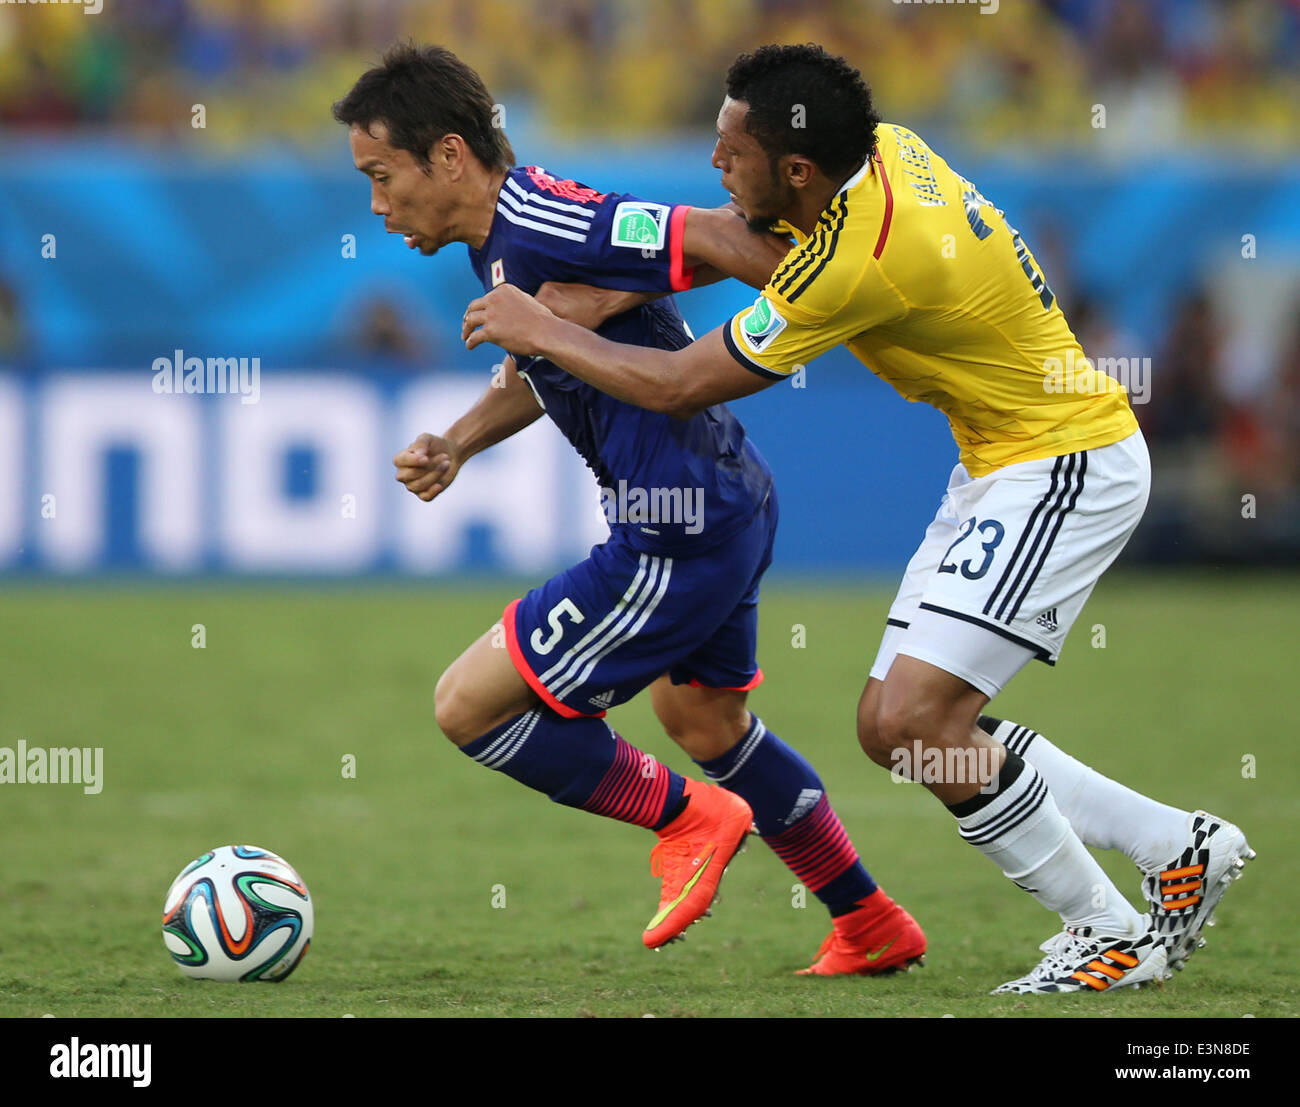 Cuiaba, Brazil. 24th June, 2014. Japan's Yuto Nagatomo vies with Colombia's Carlos Valdes during a Group C match between Japan and Colombia of 2014 FIFA World Cup at the Arena Pantanal Stadium in Cuiaba, Brazil, June 24, 2014. © Liu Dawei/Xinhua/Alamy Live News Stock Photo